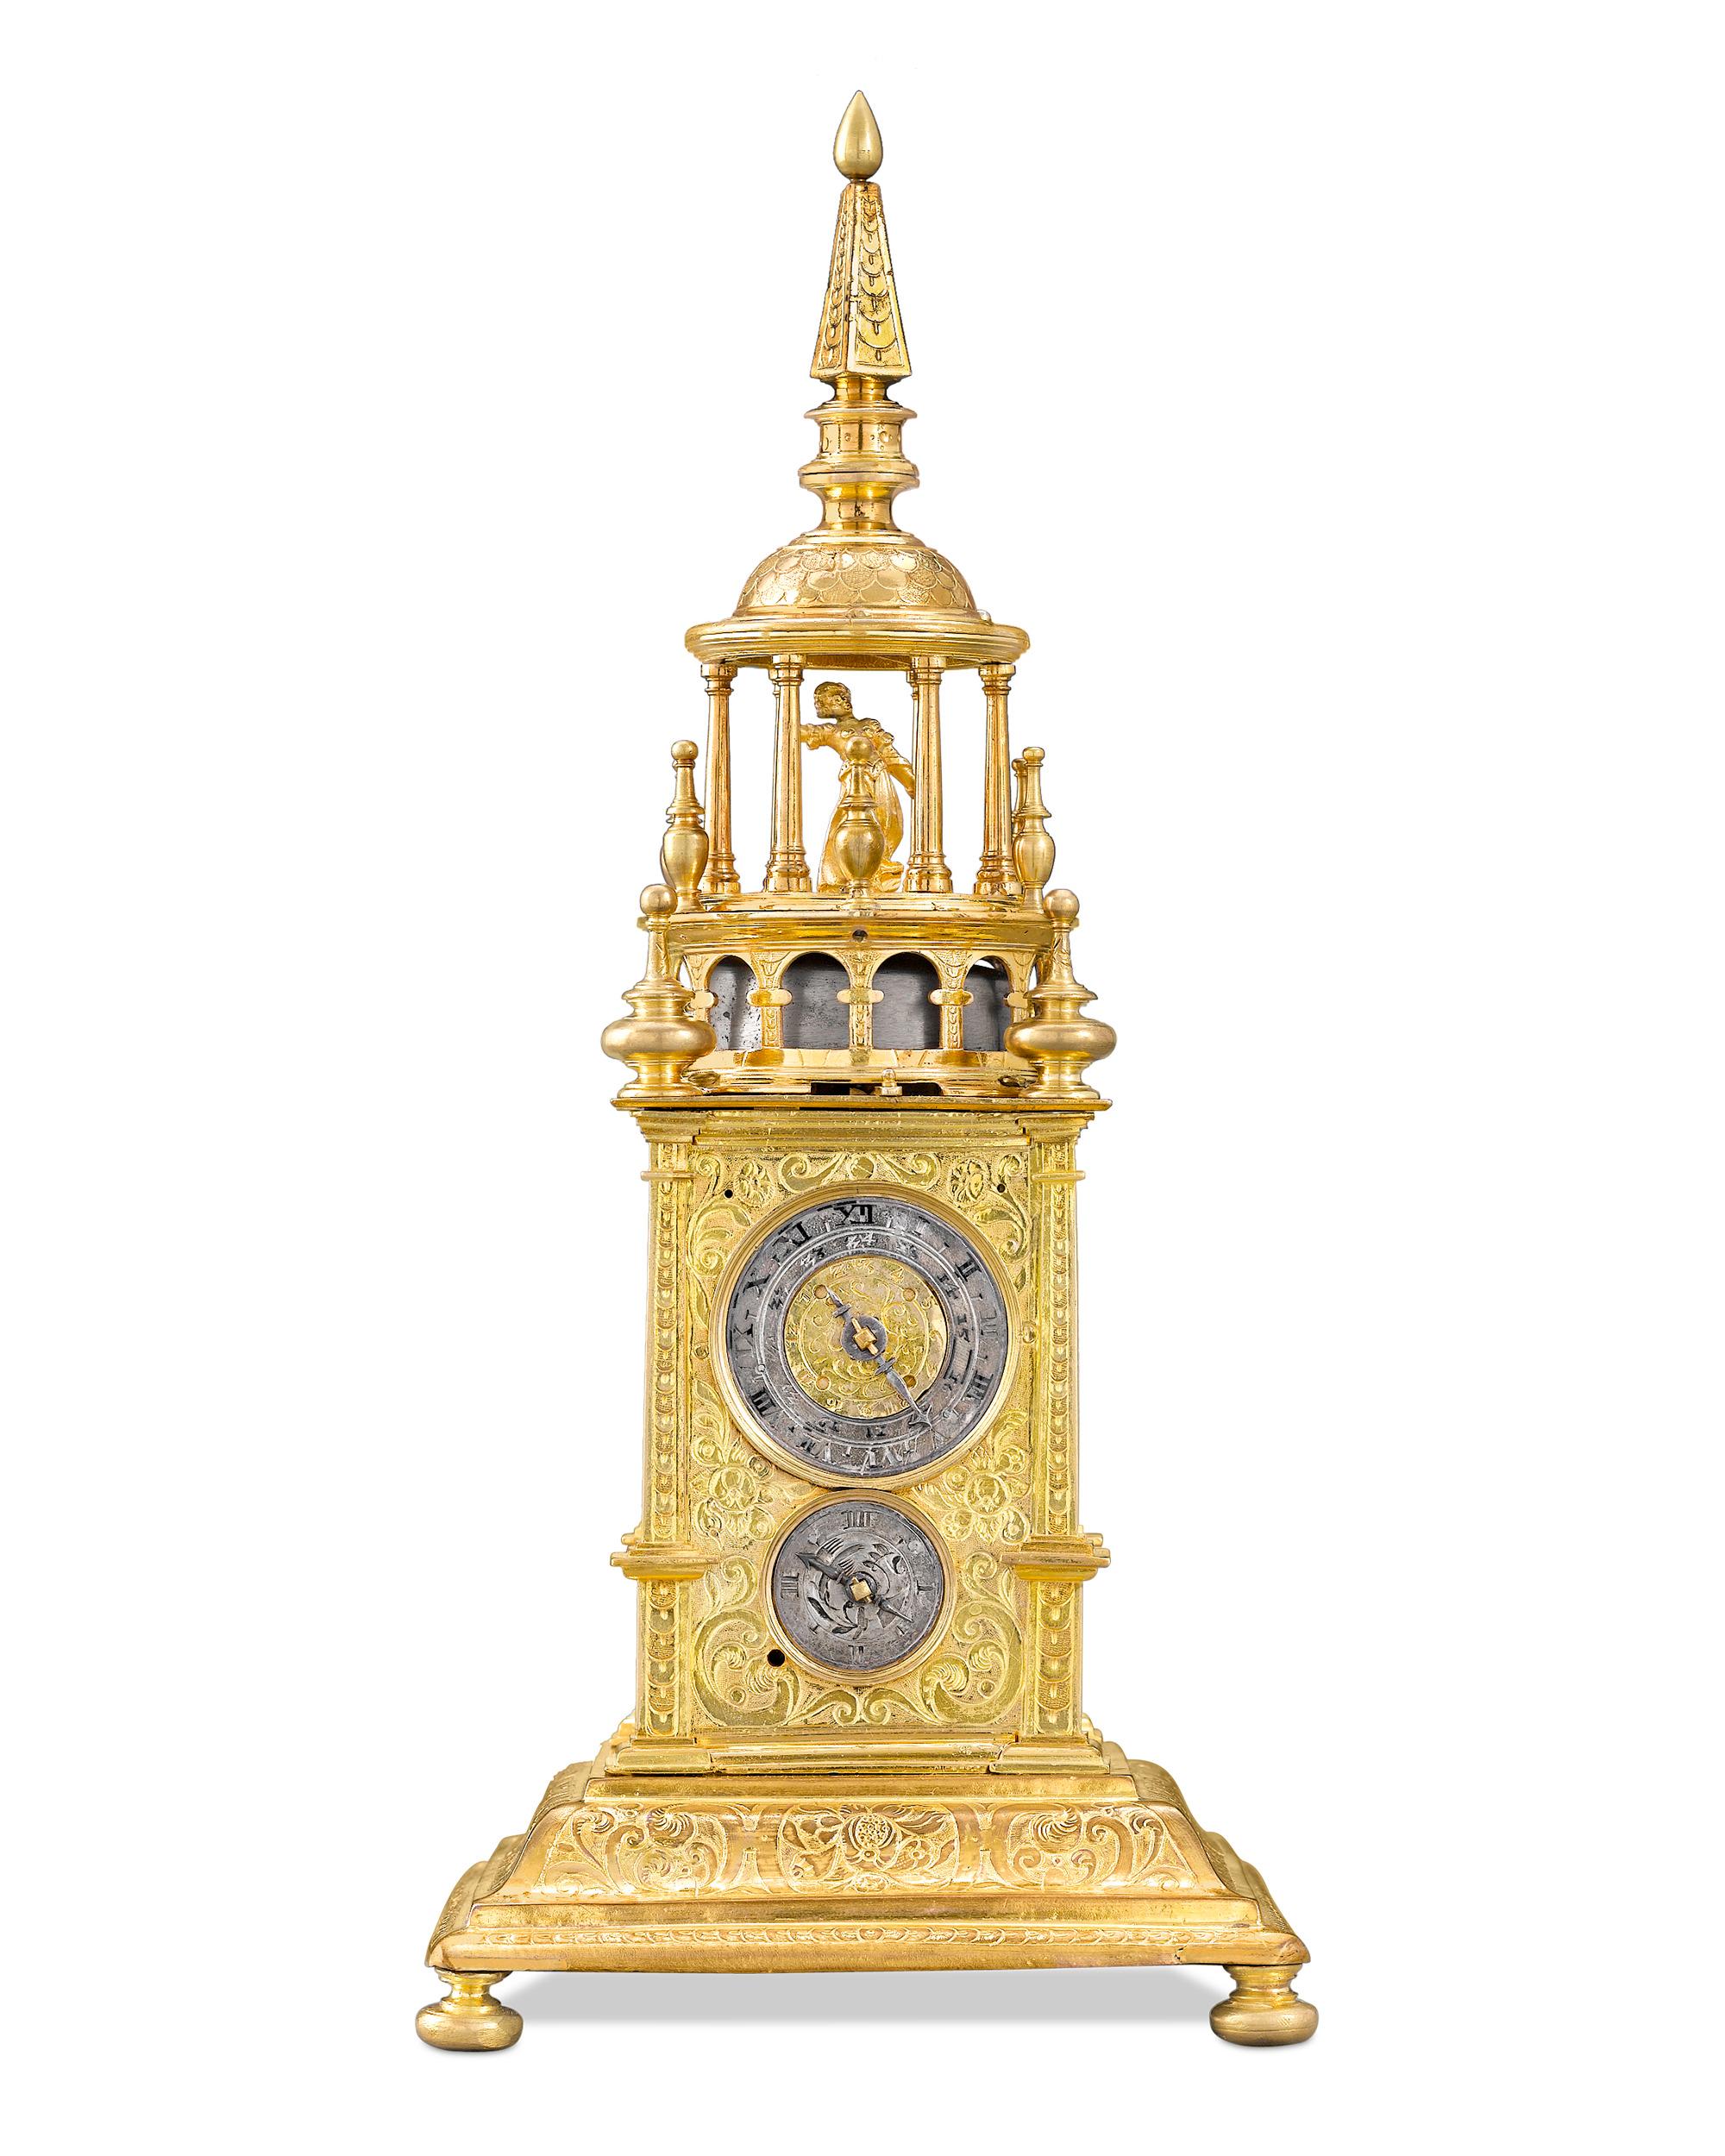 This immensely rare Renaissance turret-form clock, or the table clock, was considered both a scientific marvel and an item of luxury during the period. This incredible piece is encased in fire gilt brass crafted to resemble the giant striking clocks